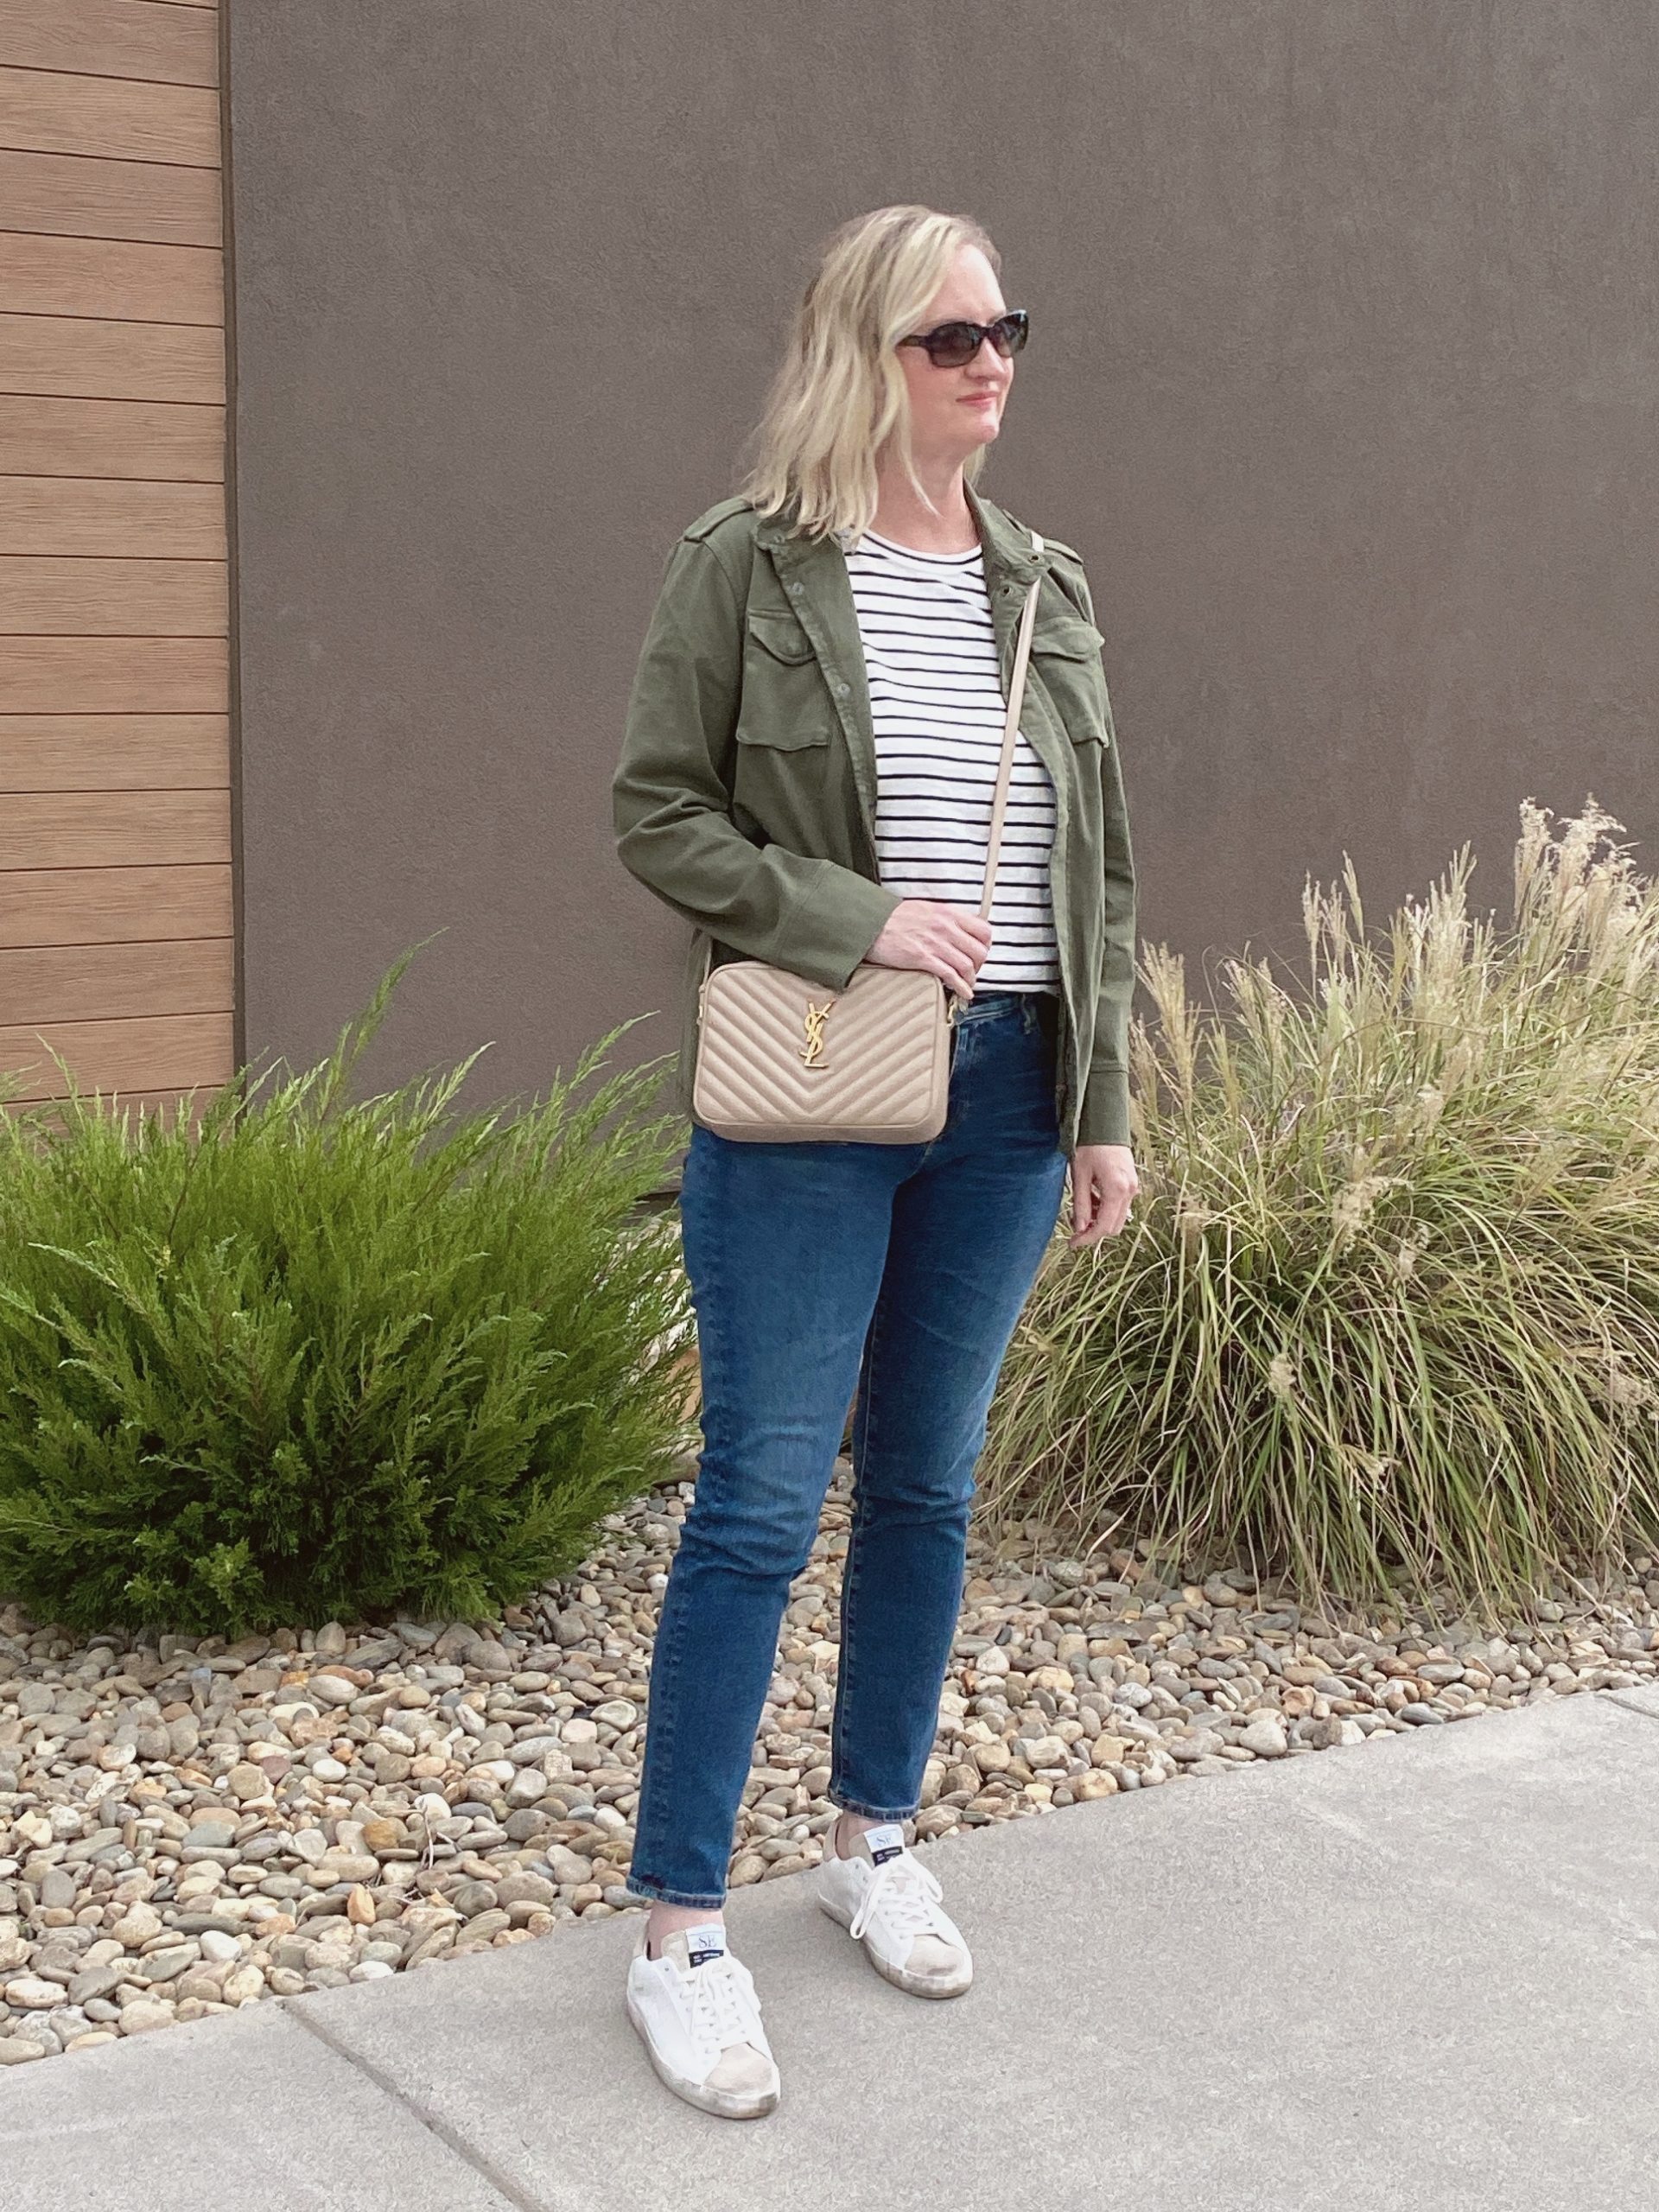 10-Piece Travel Capsule Wardrobe: What I Wore On Our Smoky Mountains ...